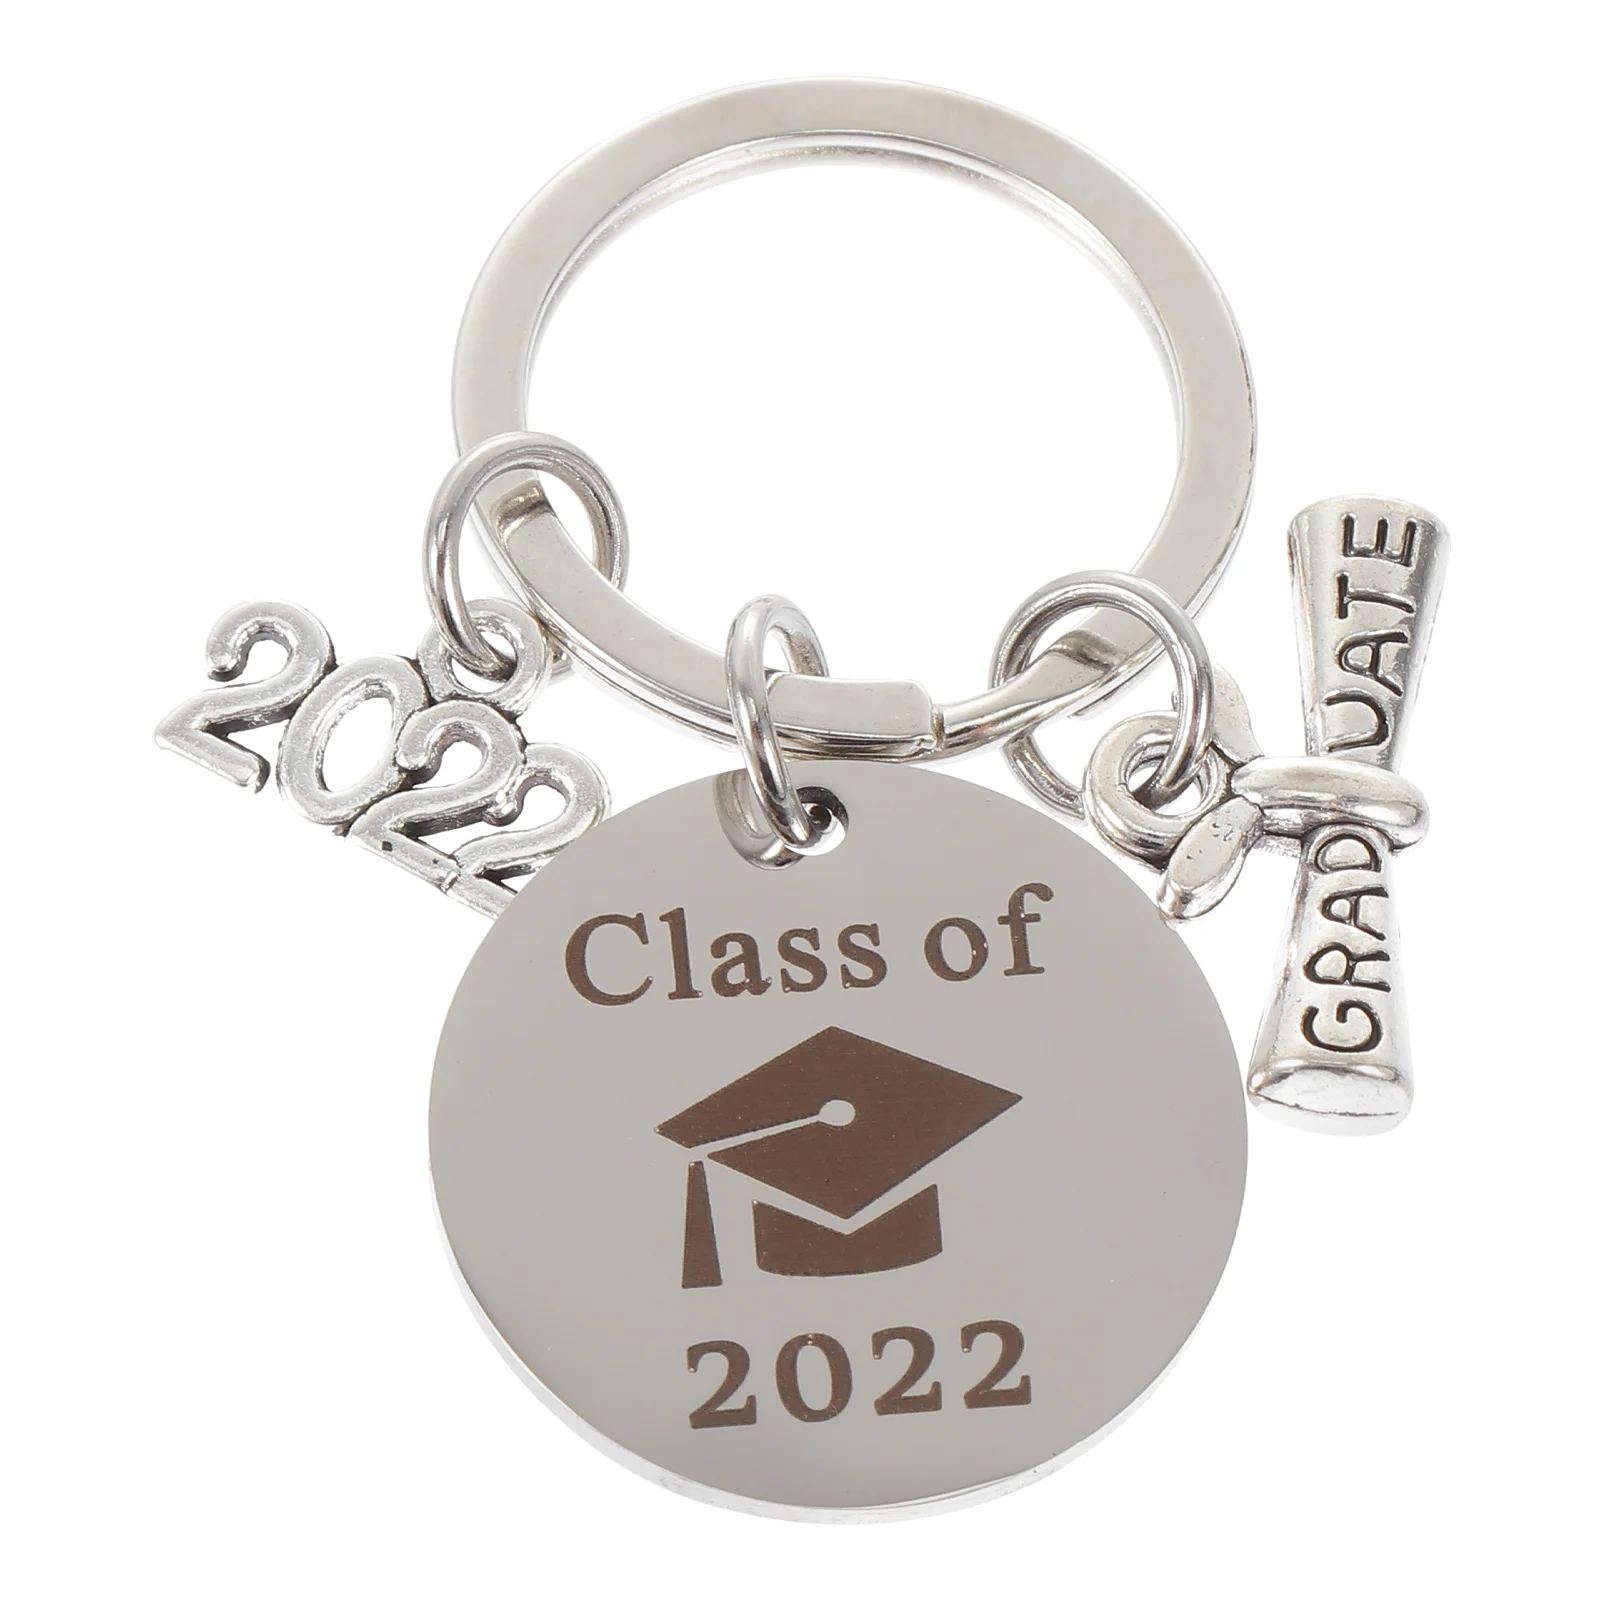 

Graduation 2022 Keychain Gifts Key Gift Class Keyring Rings Graduate Grad Keychains College Inspirational Pendant Ring Chain